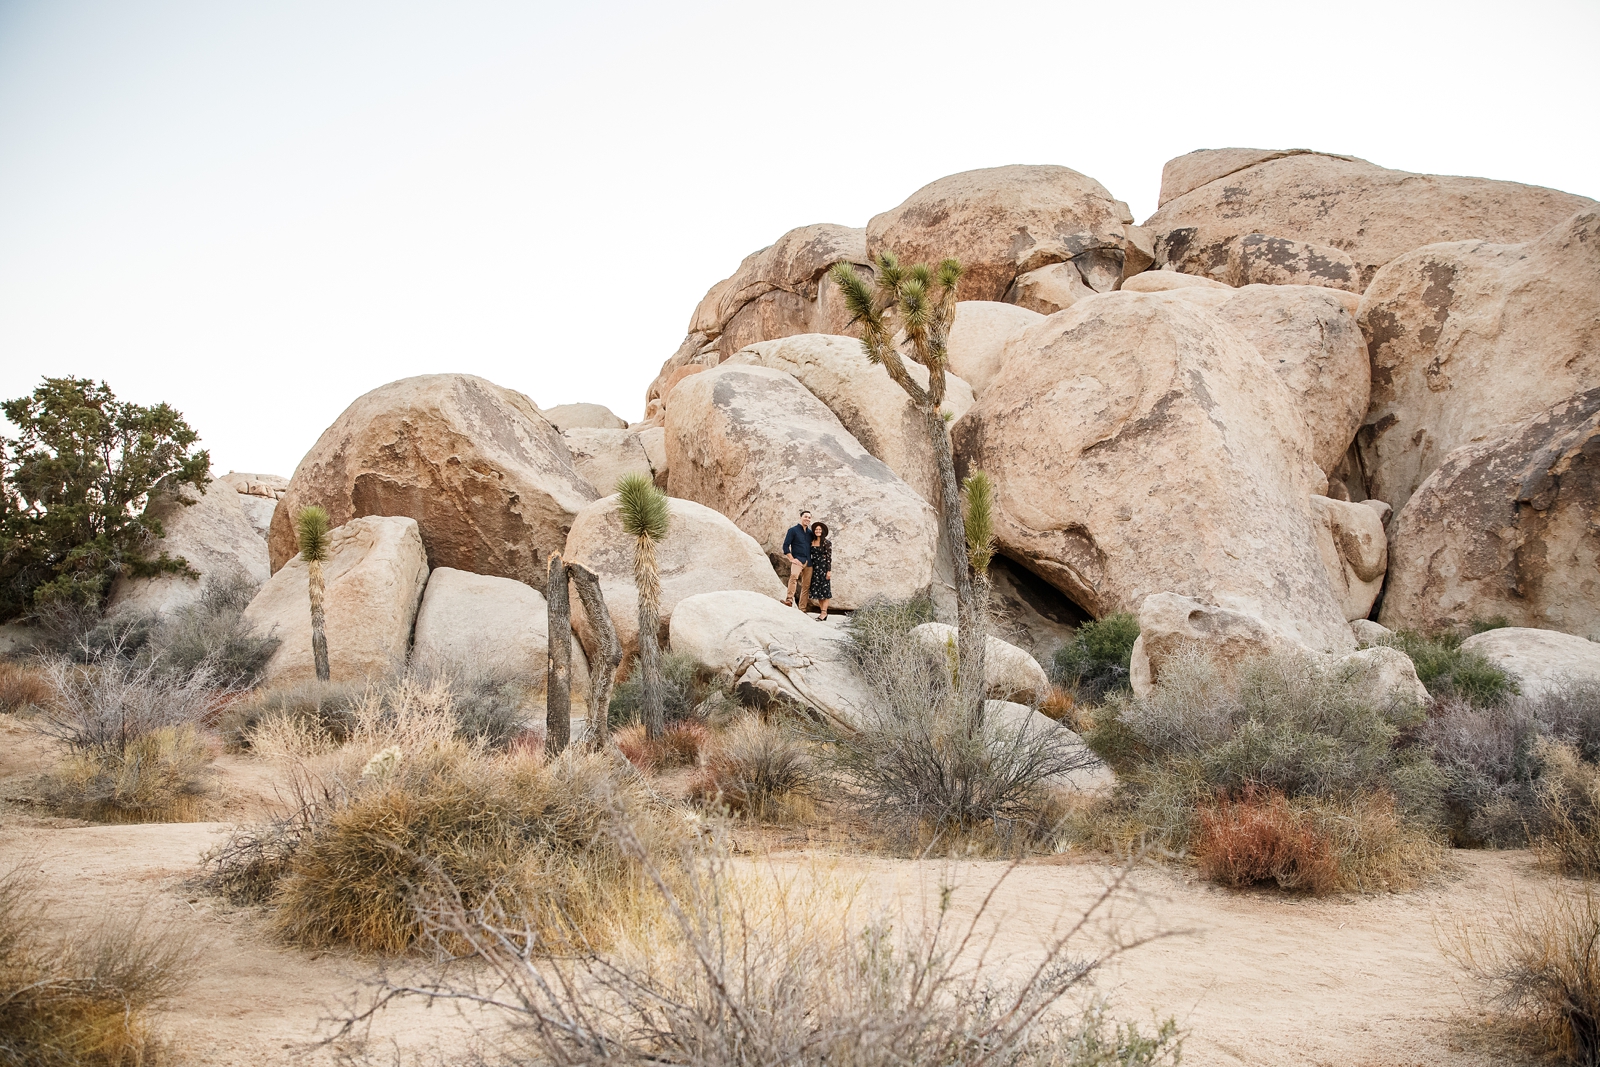 This engaged couple on the boulders in Joshua Tree NP.